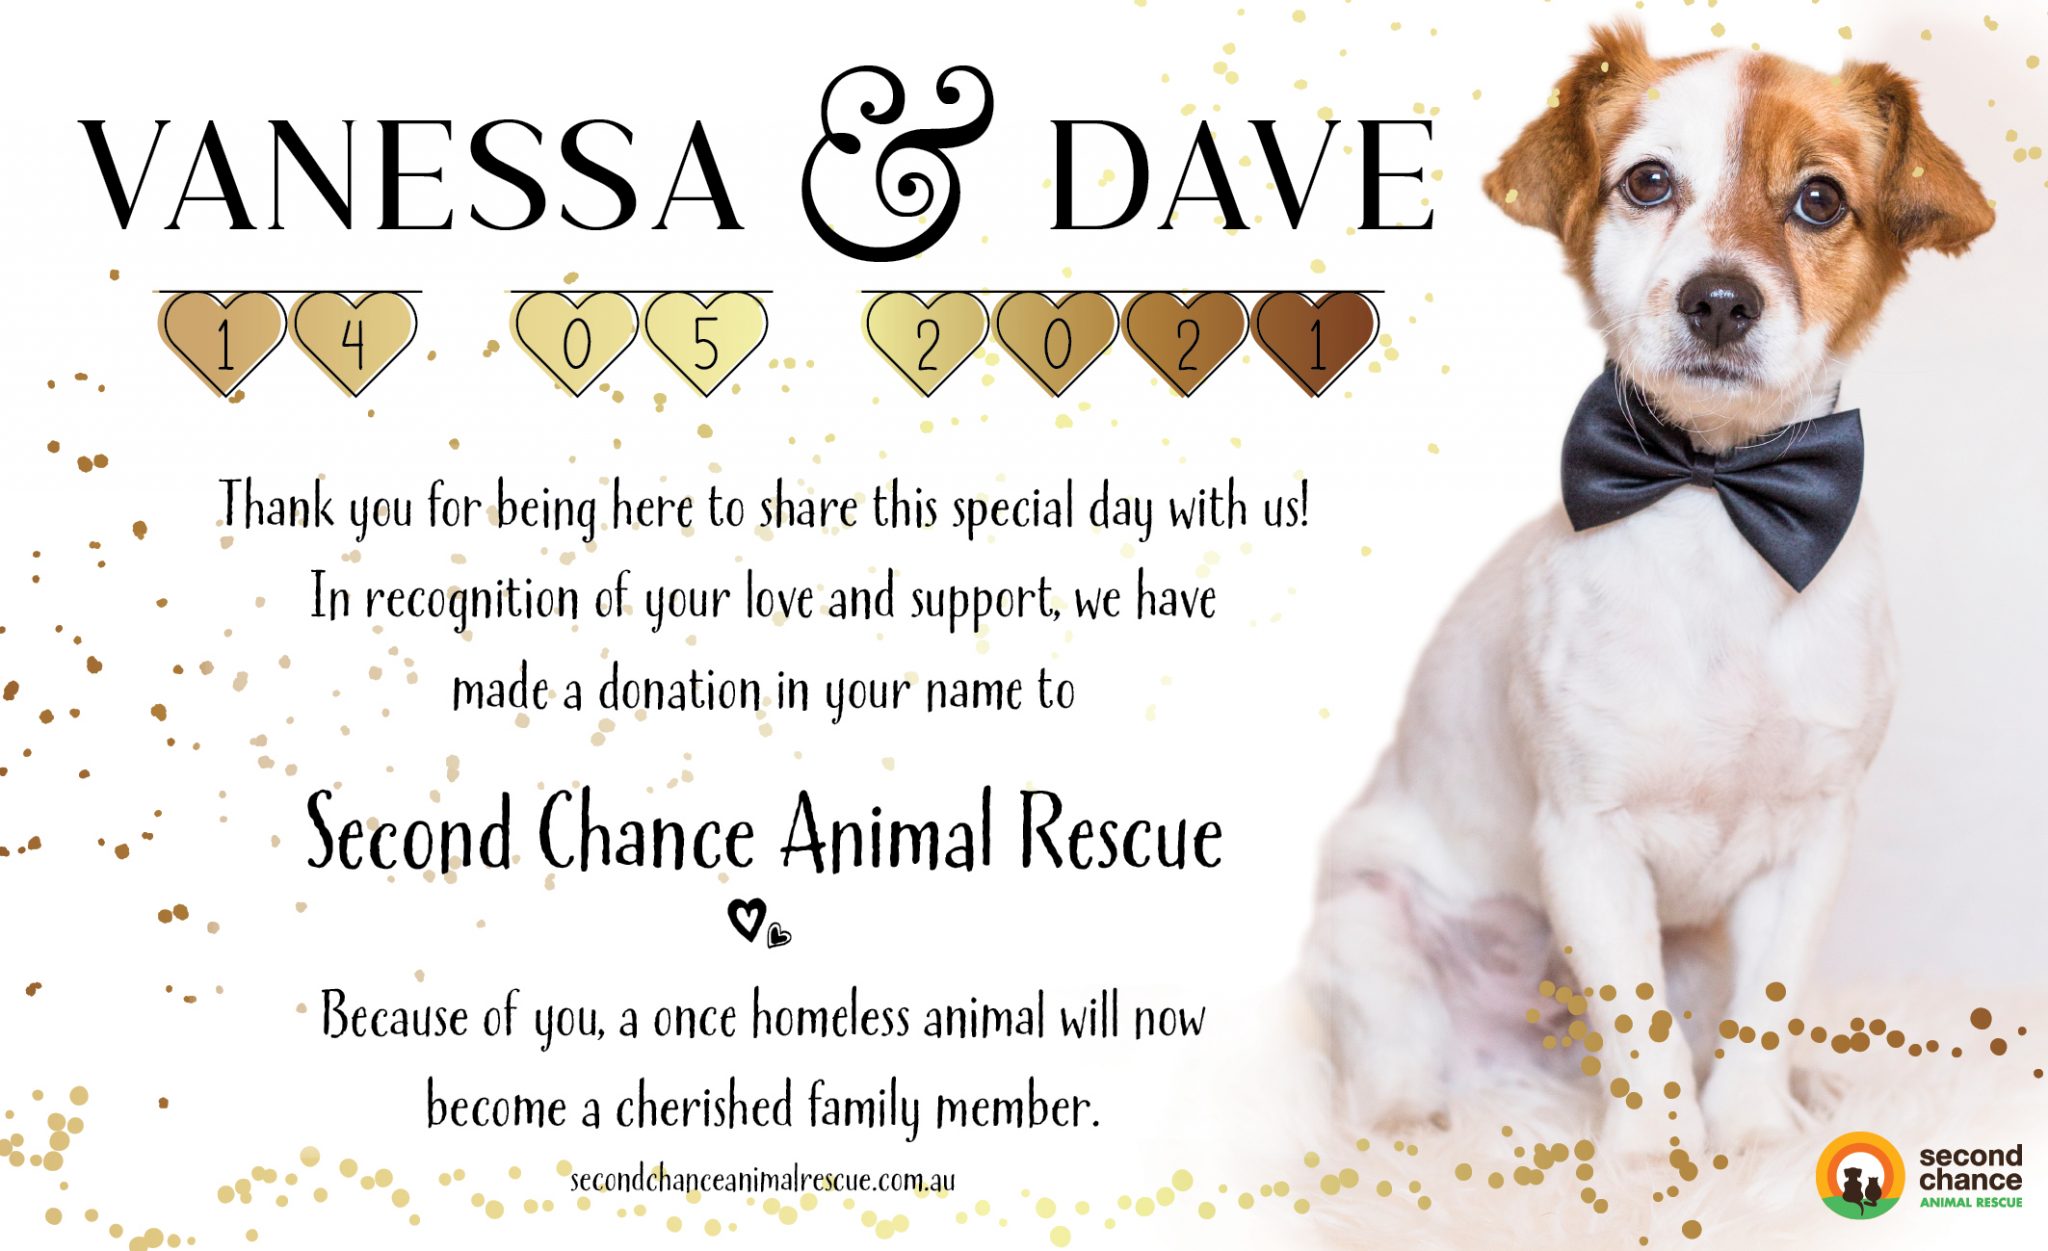 Wedding favours - Second Chance Animal Rescue